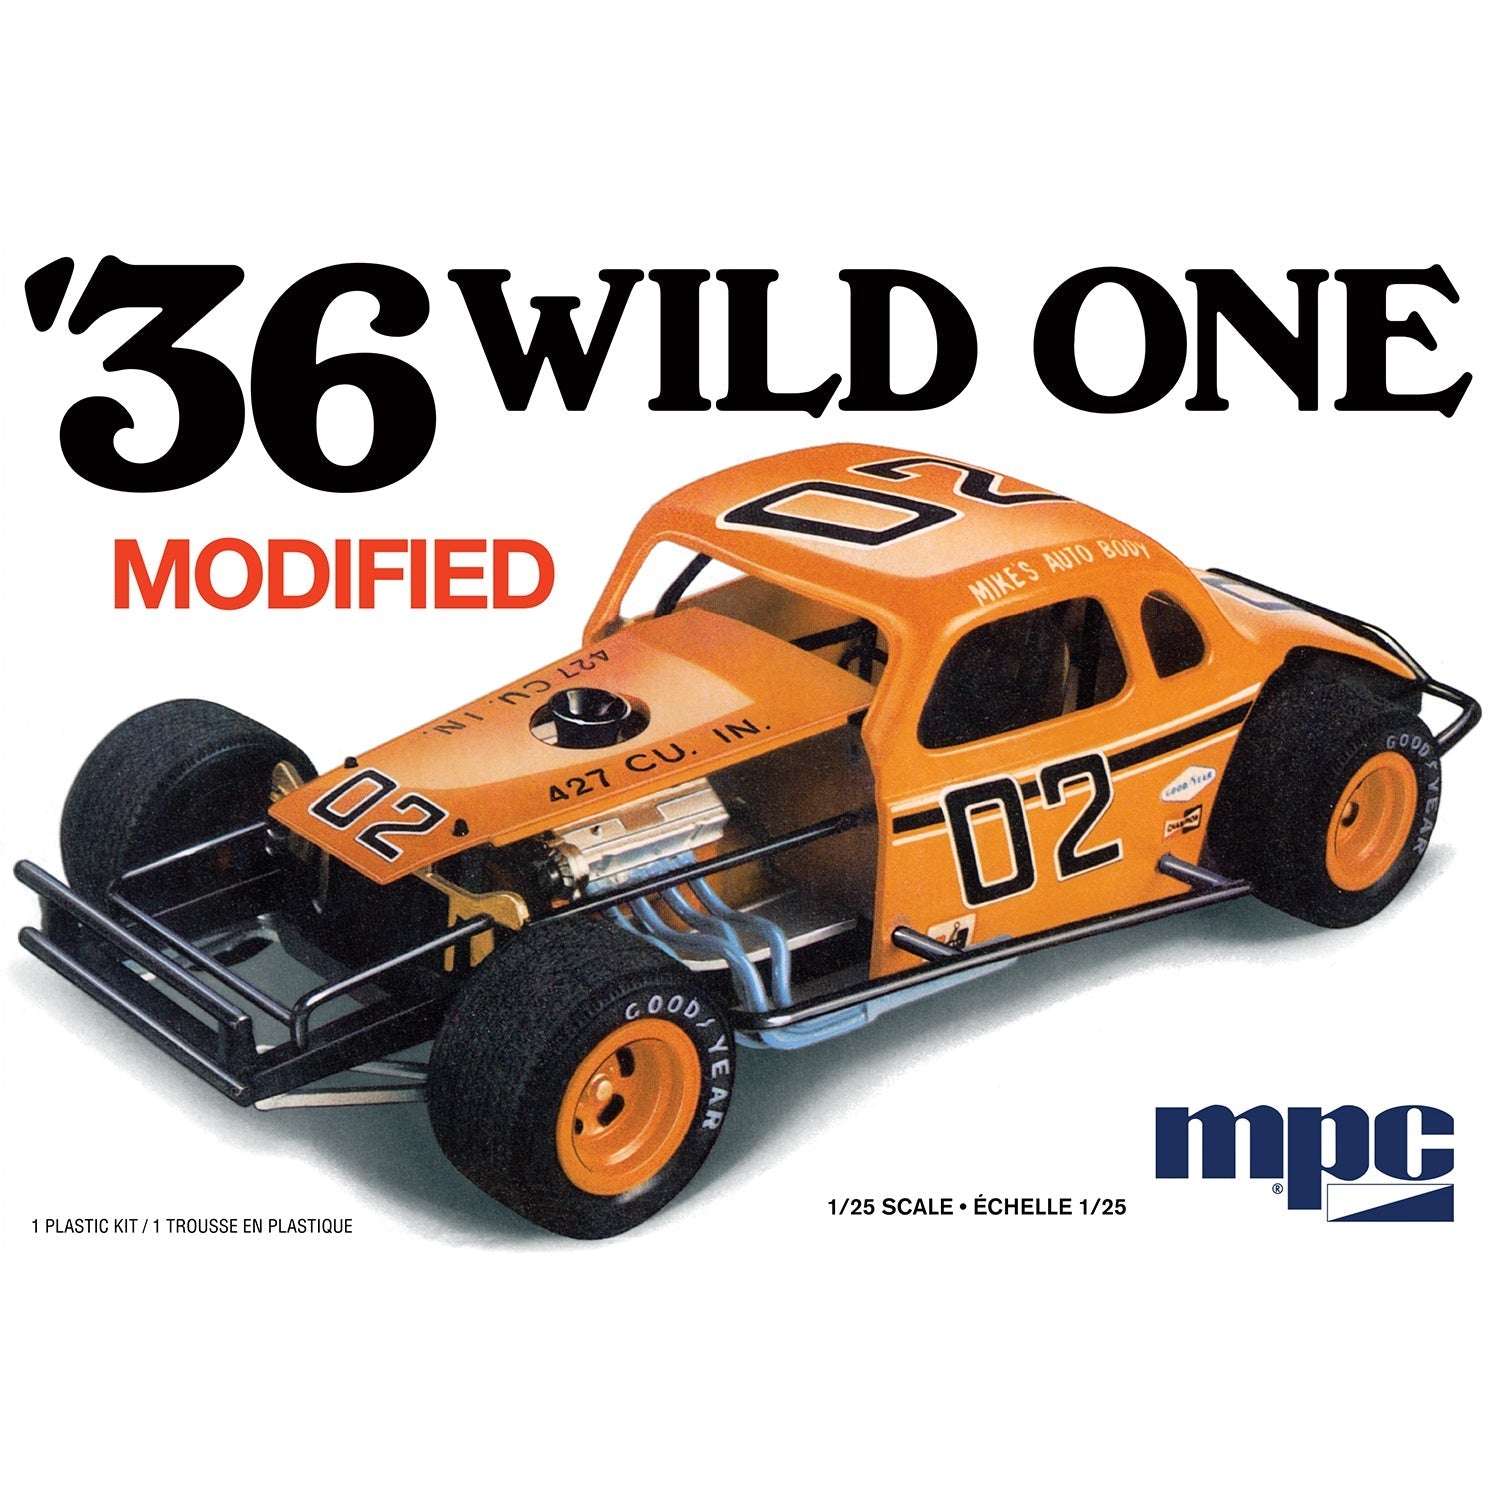 M Pieces® '36 Wild One Modified Plastic Model Kit, 1/25 Scale